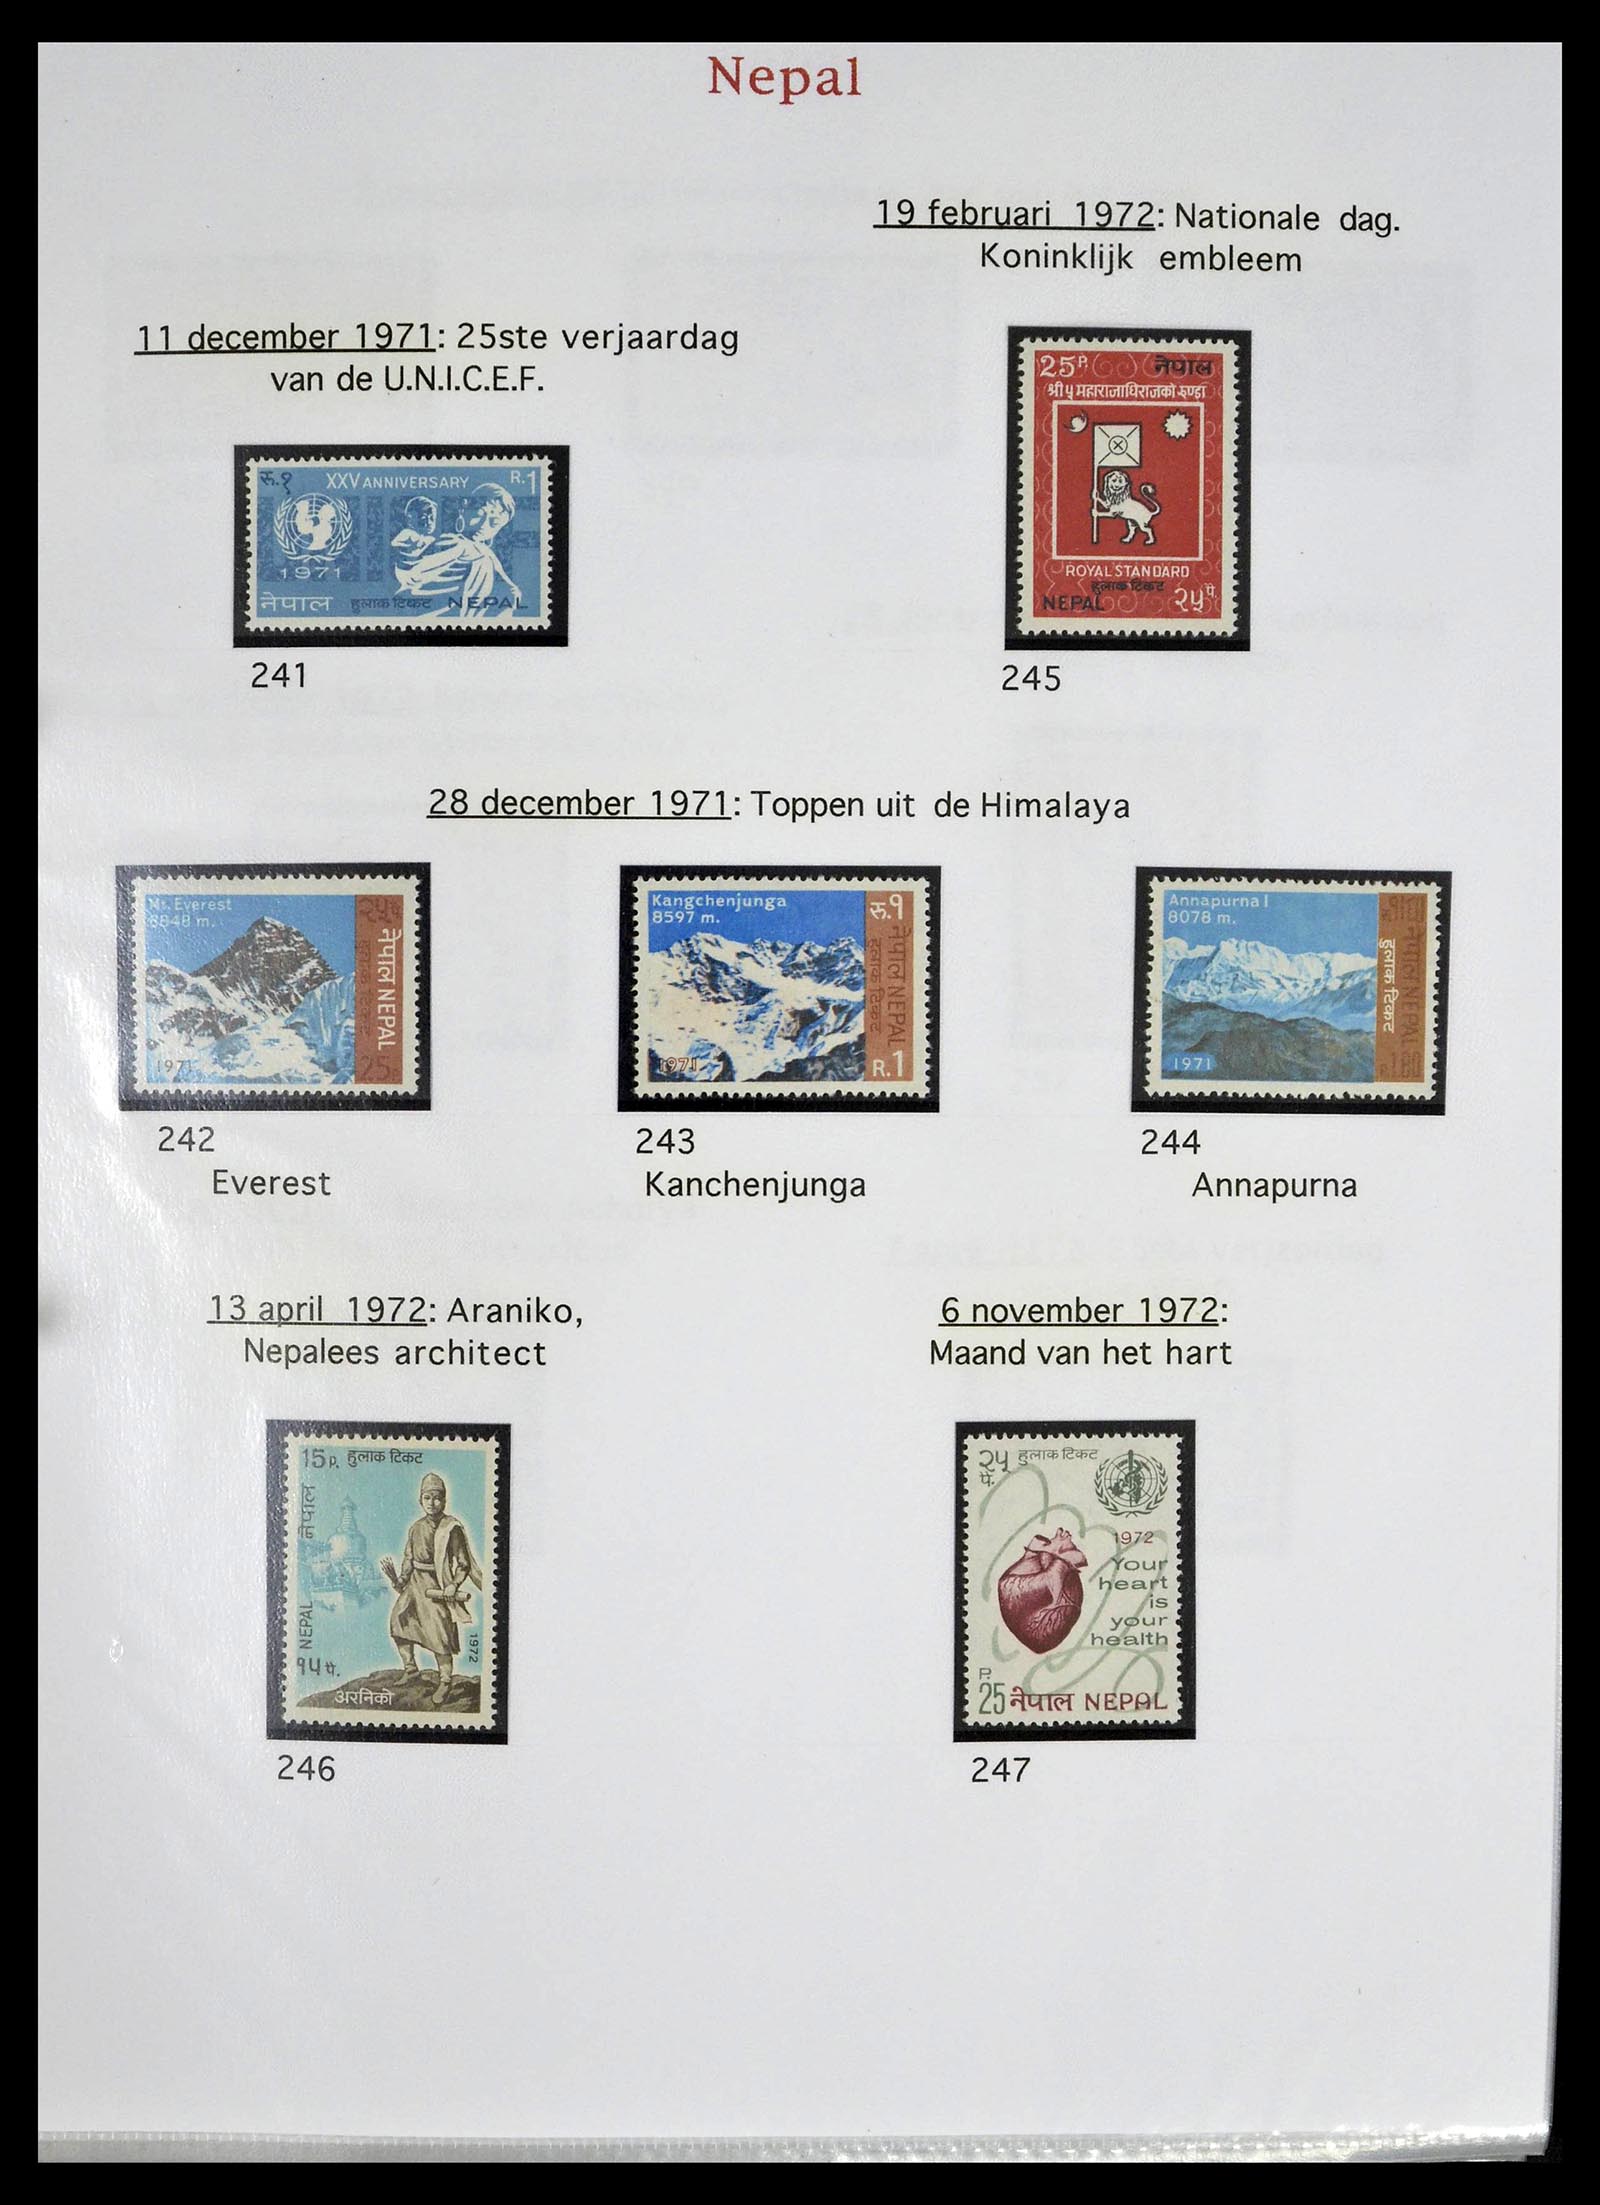 39313 0030 - Stamp collection 39313 Nepal 1881-1999.